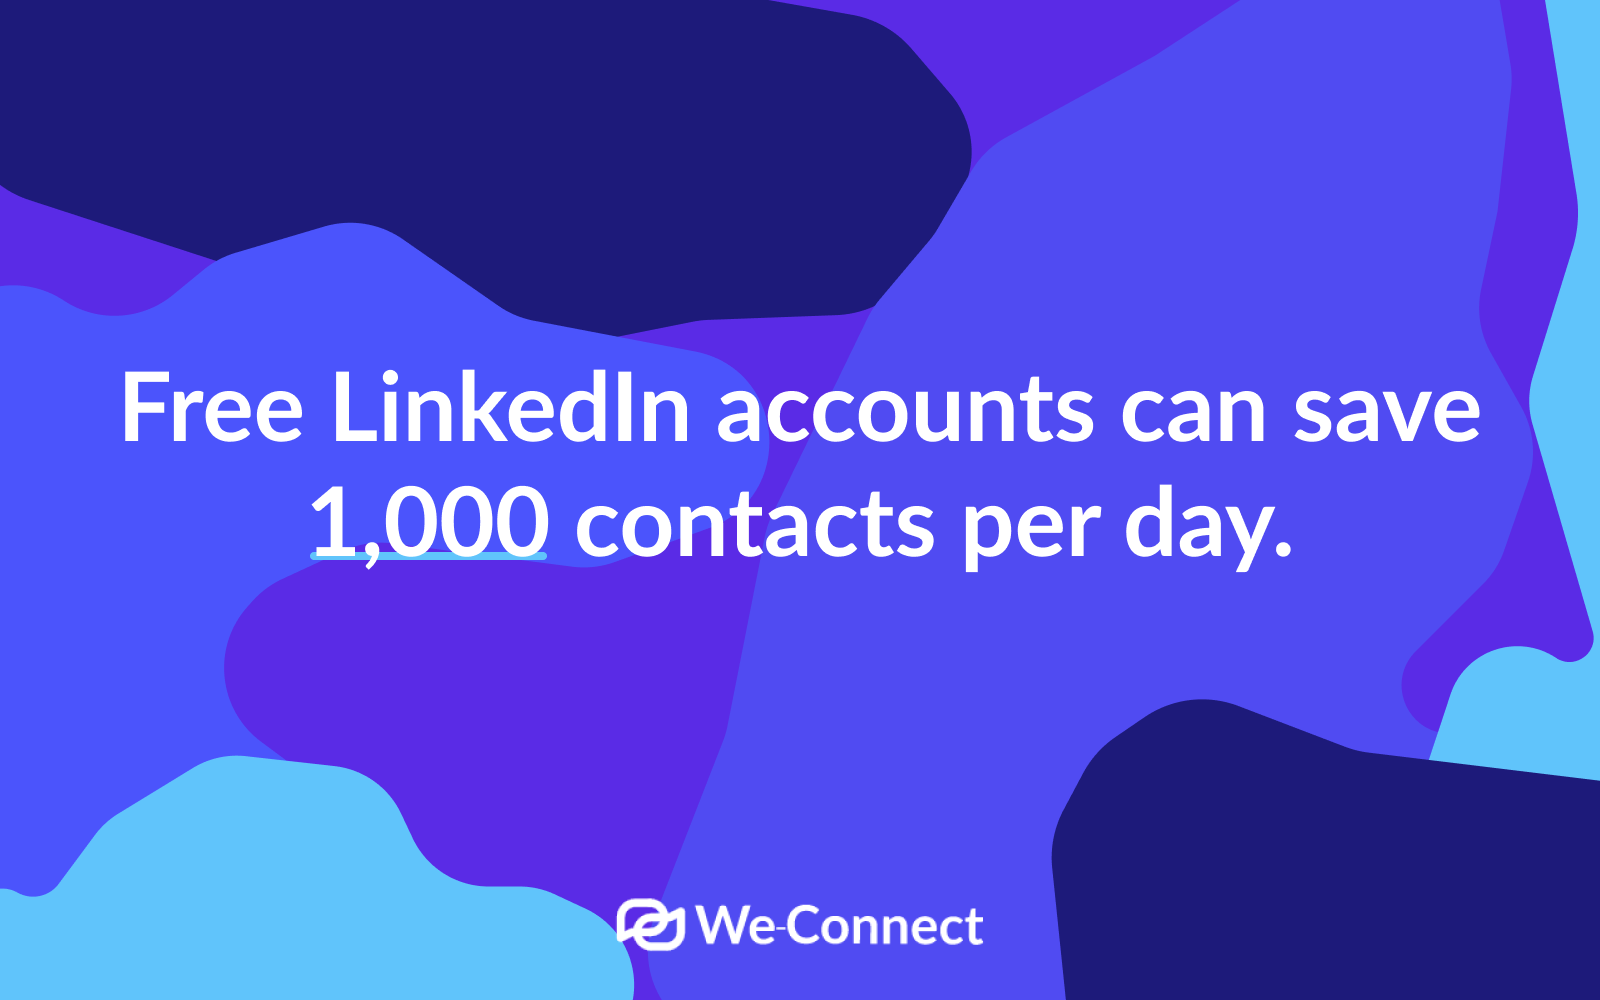 Free LinkedIn accounts can save 1,000 contacts per day.